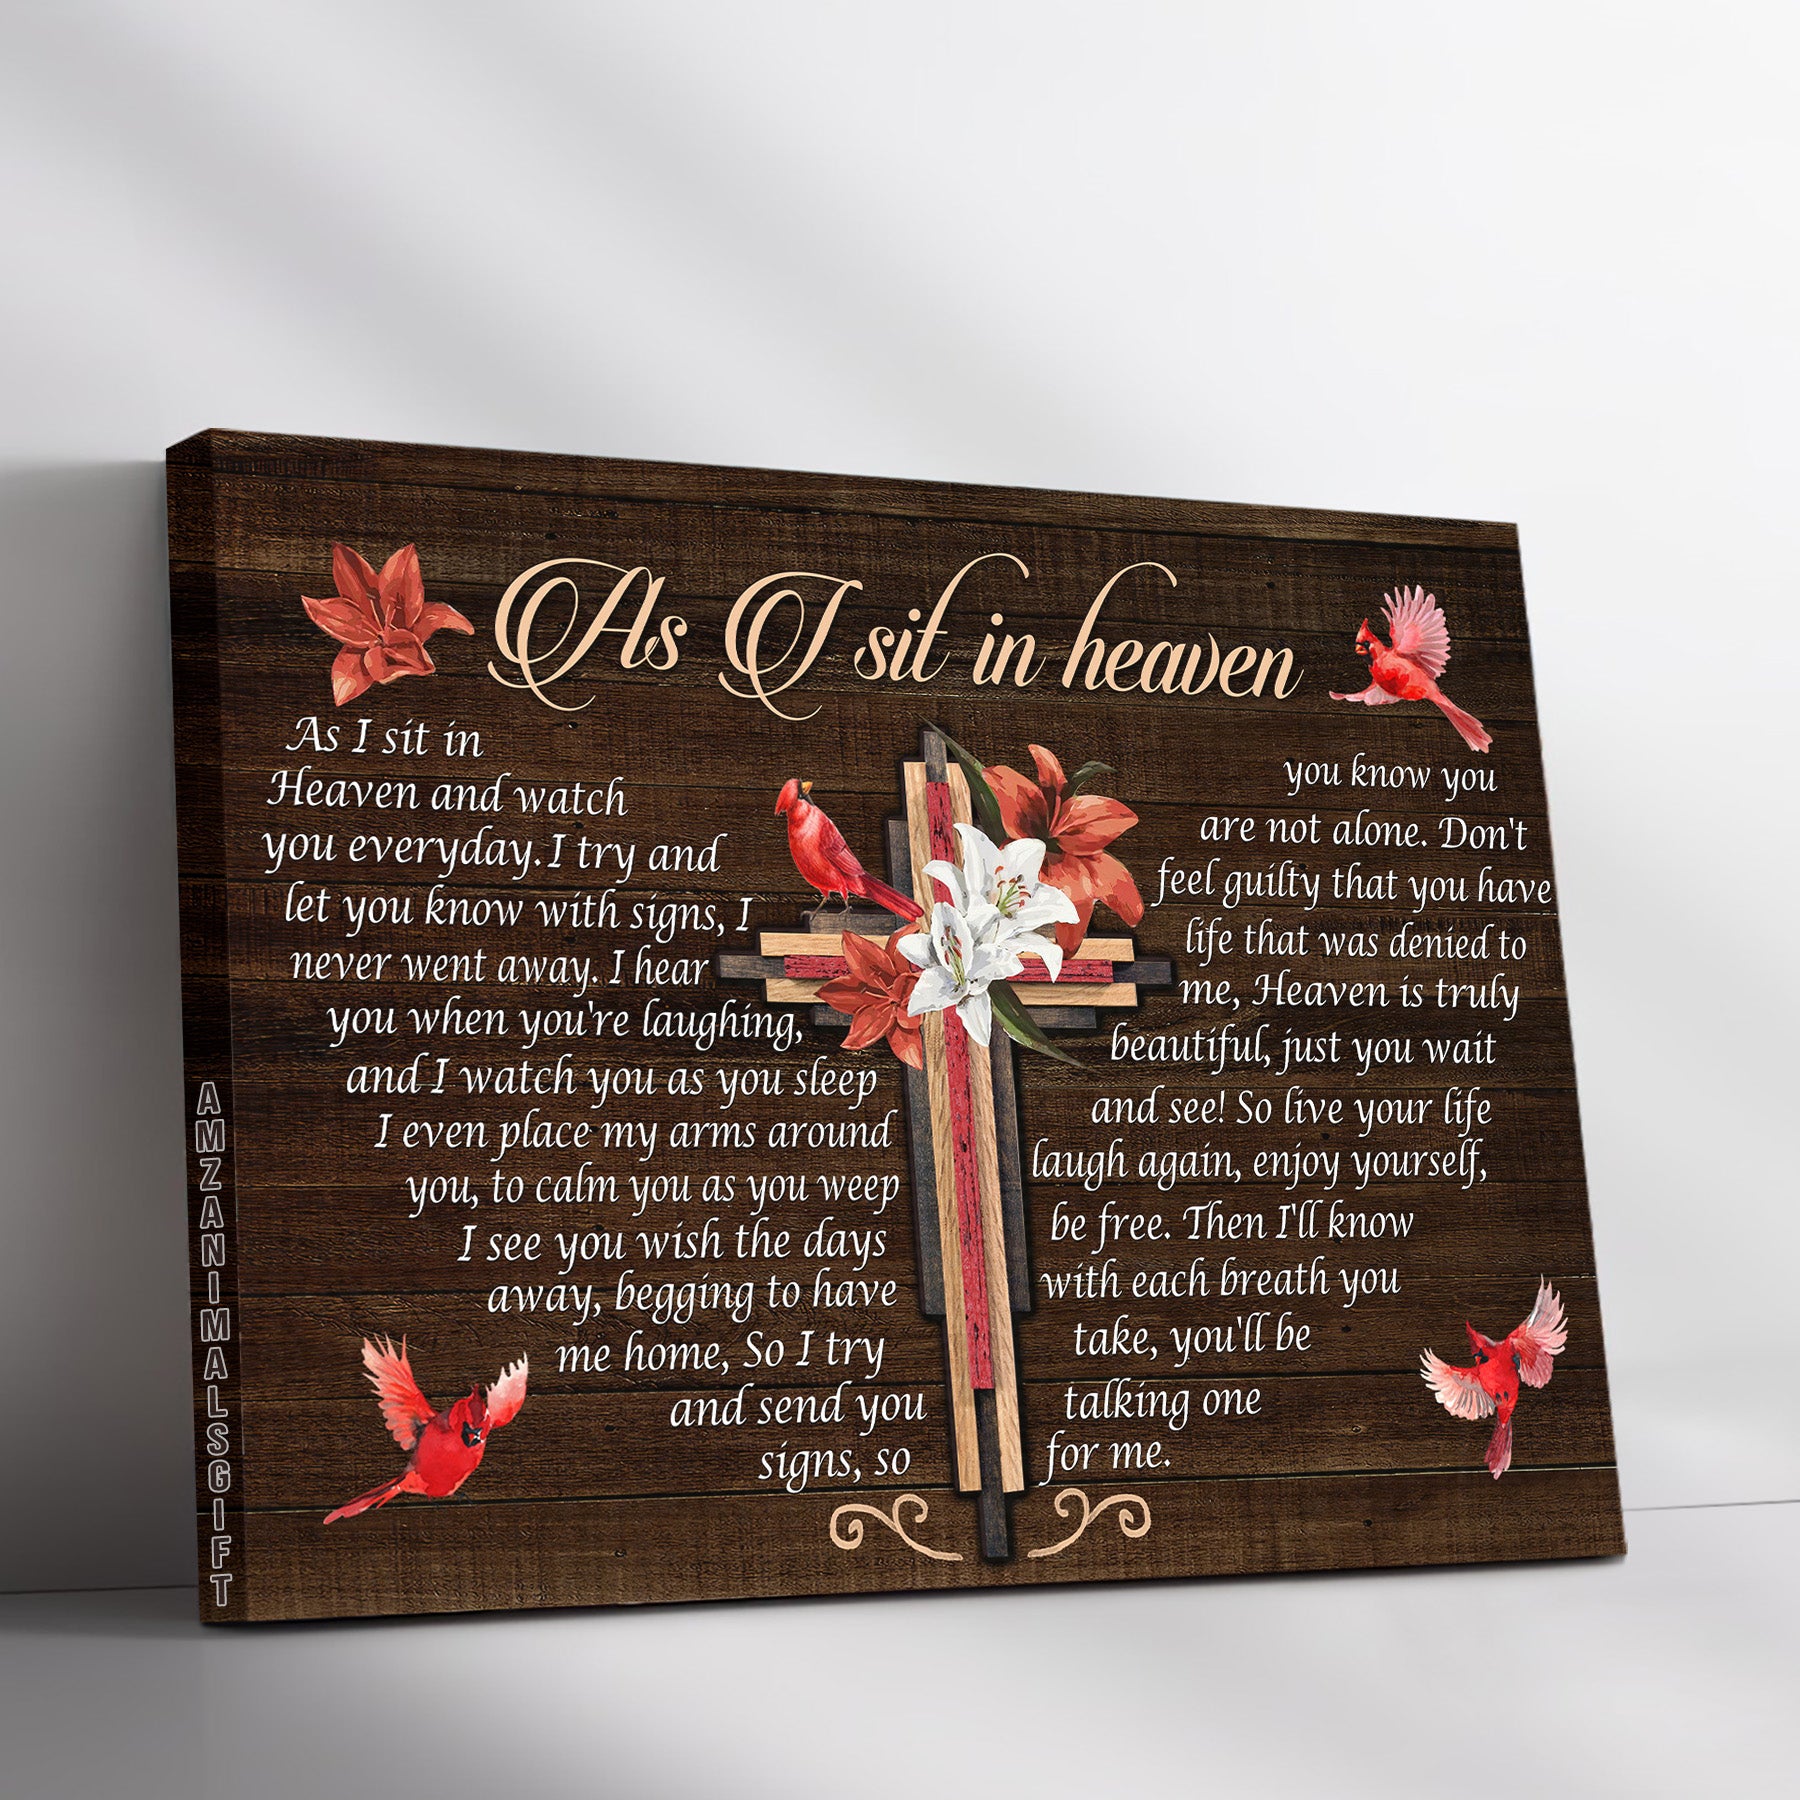 Memorial Premium Wrapped Landscape Canvas - Big Cross, Lily Flower Painting, Red Cardinal, As I Sit In Heaven - Perfect Gift For Members Family